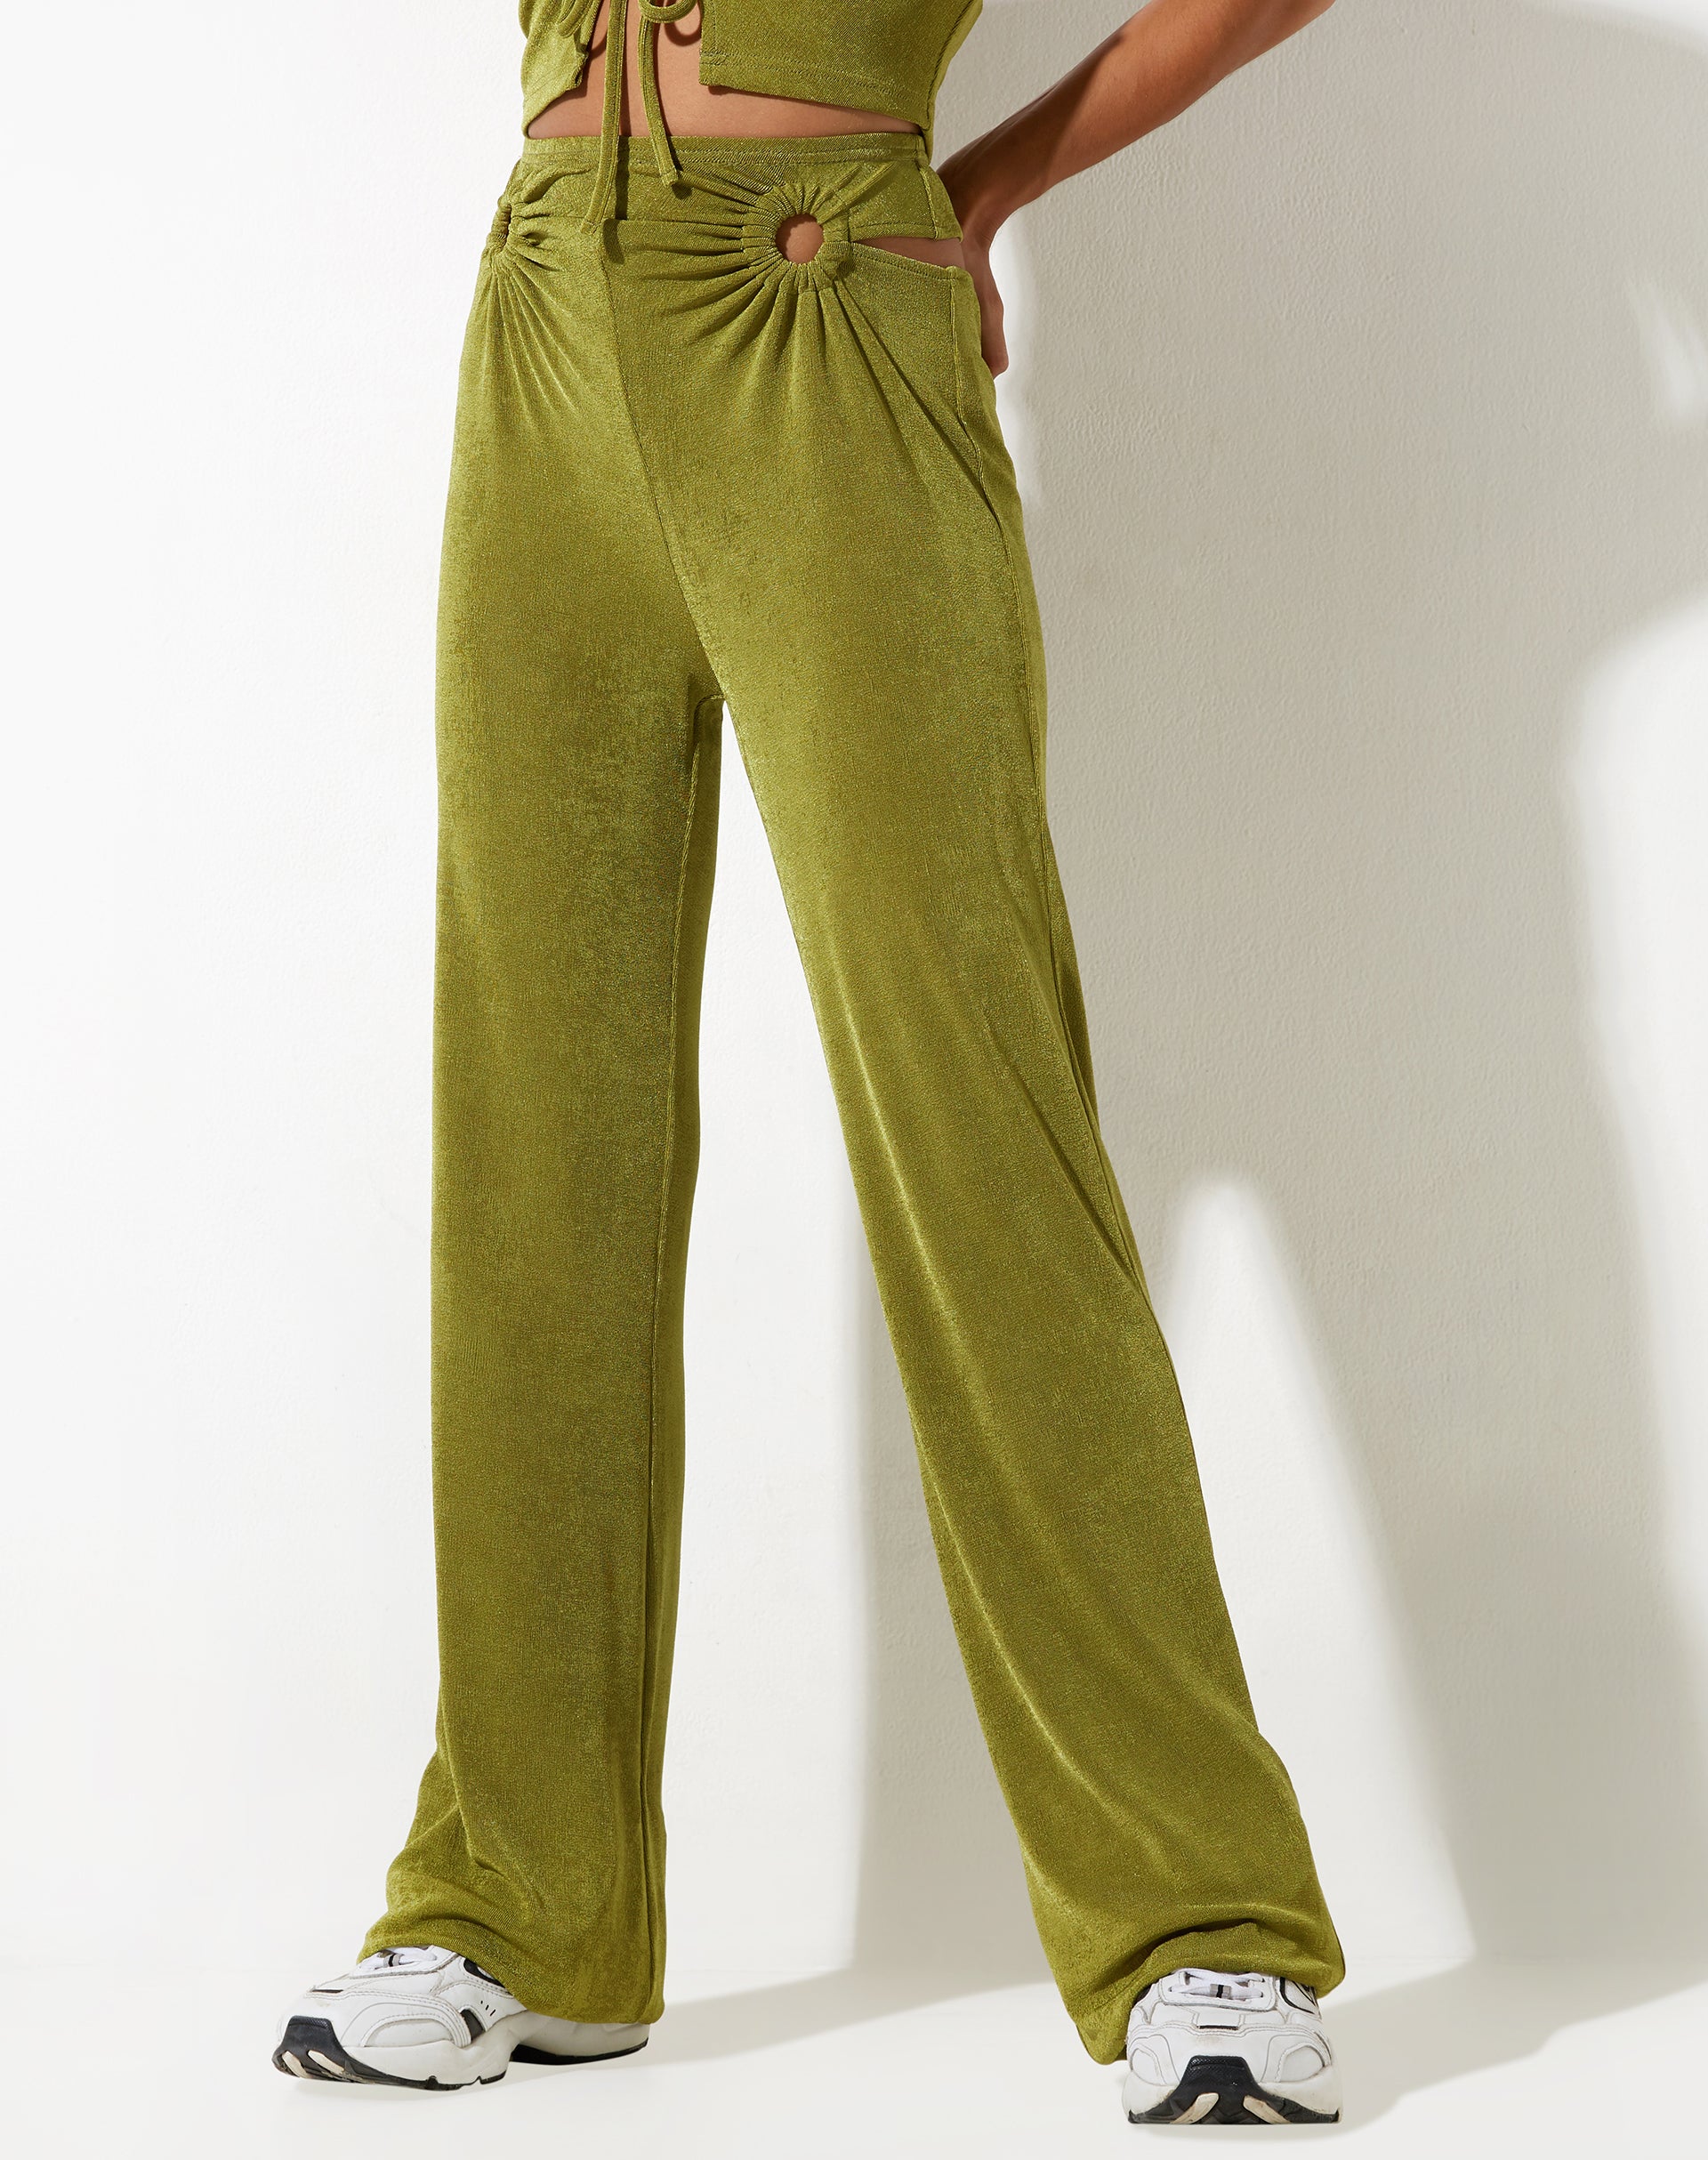 image of Sesaot Flare Trouser in Crepe Lime